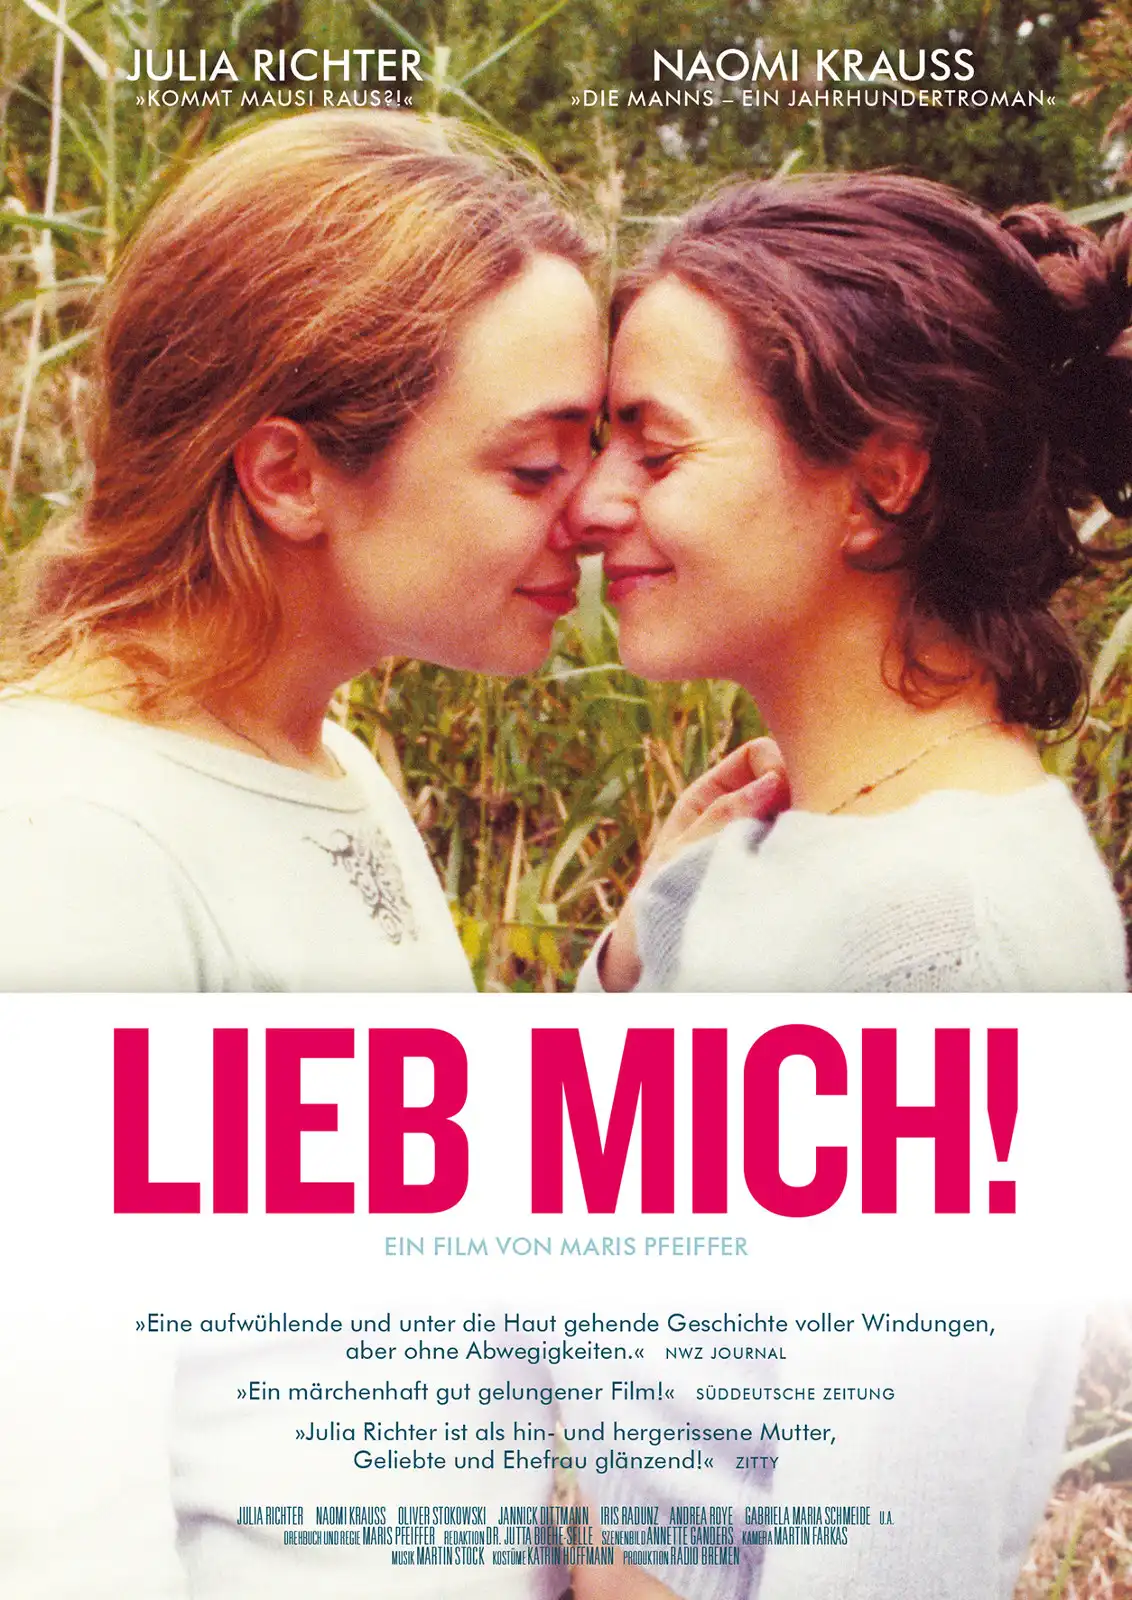 Watch and Download Lieb mich! 1